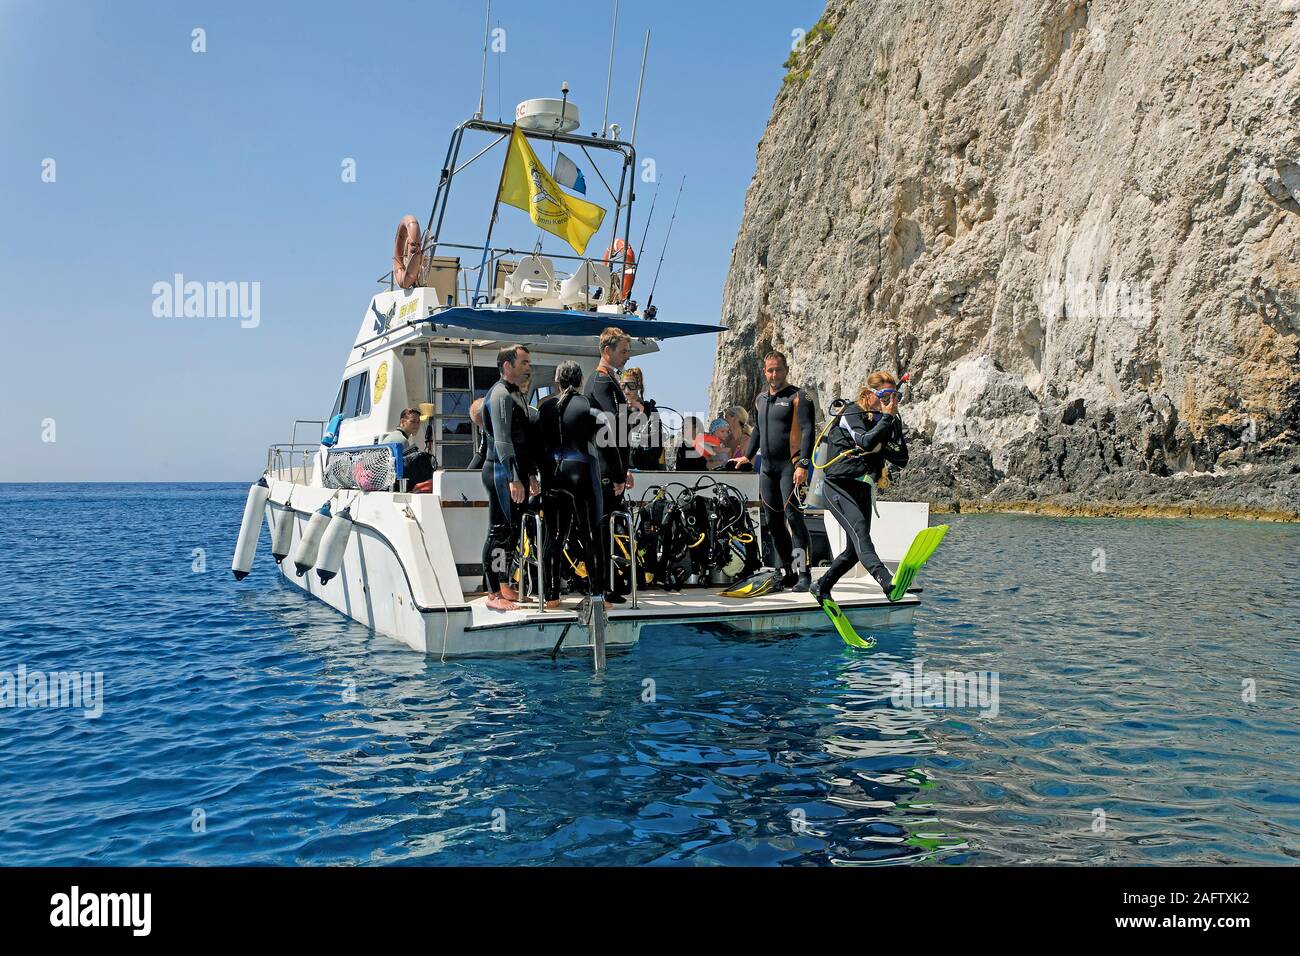 Scuba diver jumping from boat in the sea, Zakynthos island, Greece Stock Photo